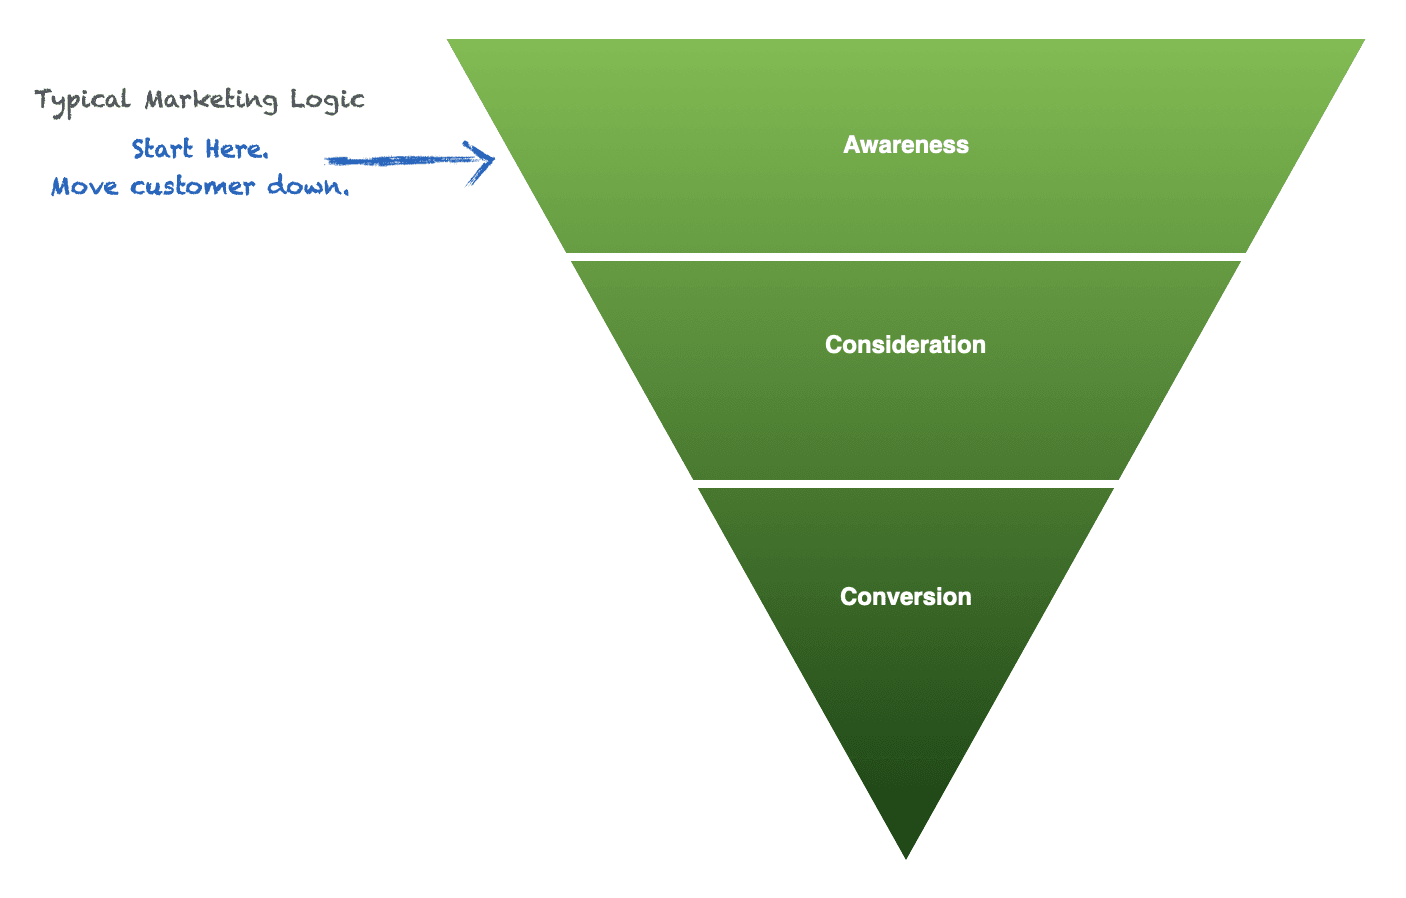 Typical Marketing Logic: Top of Funnel - Awareness, Consideration, Conversion